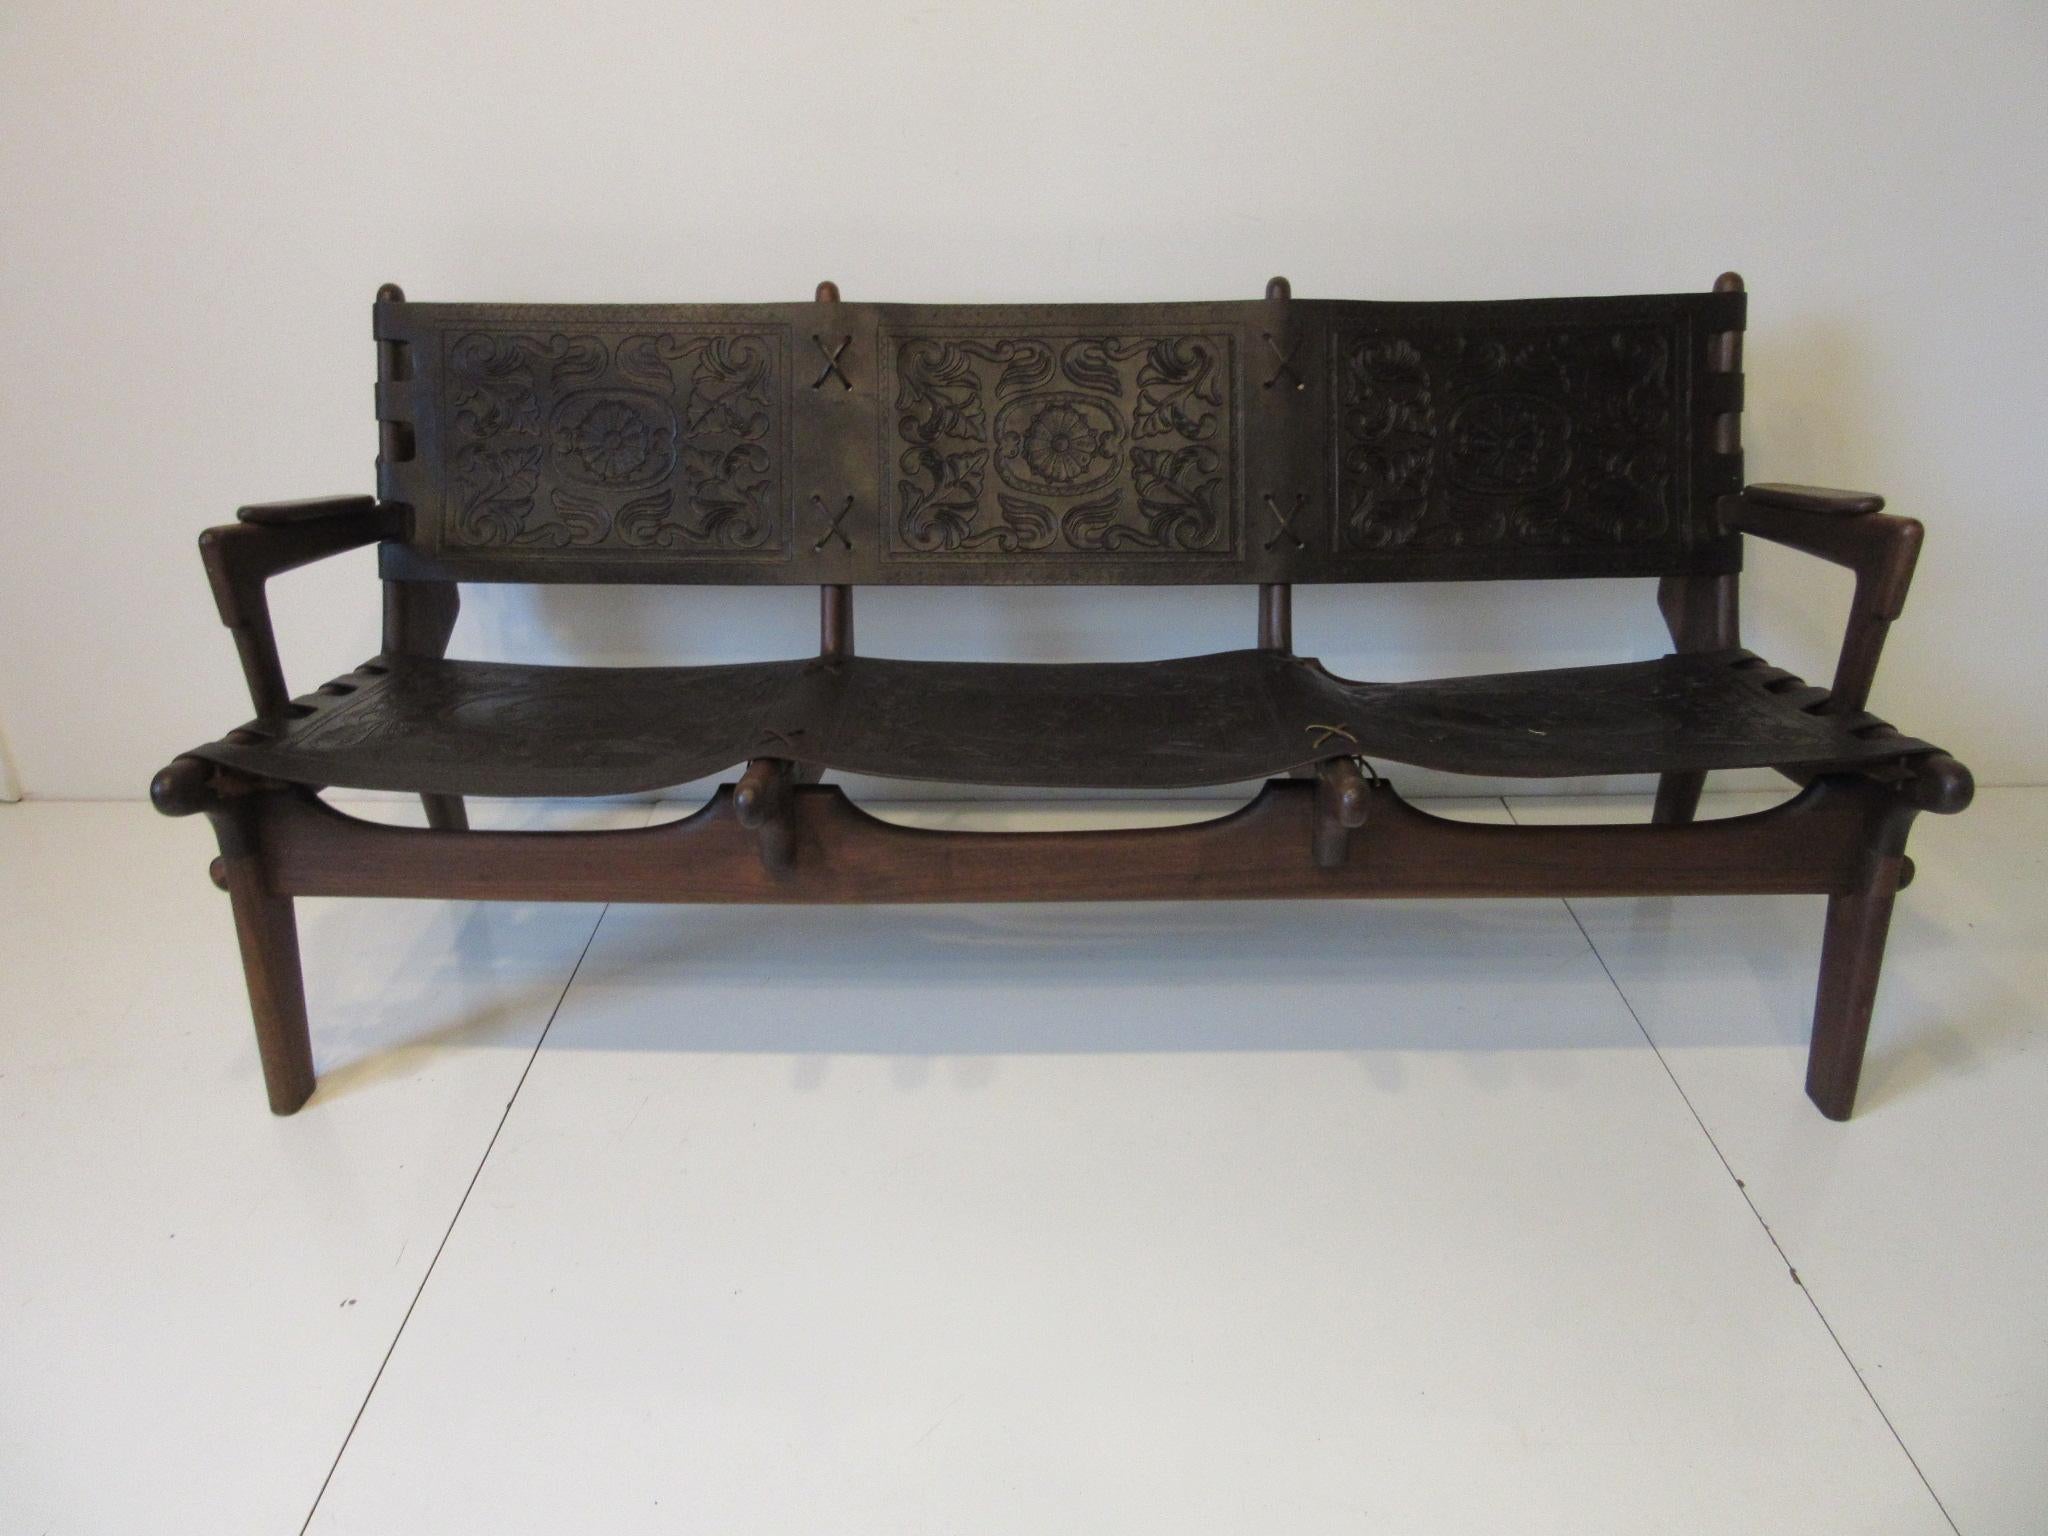 A handcrafted three-seat sofa by famed designer and craftsman Ecuadoran Angel Pazmino made during the height of the 1960s Mid-Century Modern movement in South America. Made of solid rosewood using pegs and fitting together like a interlocking